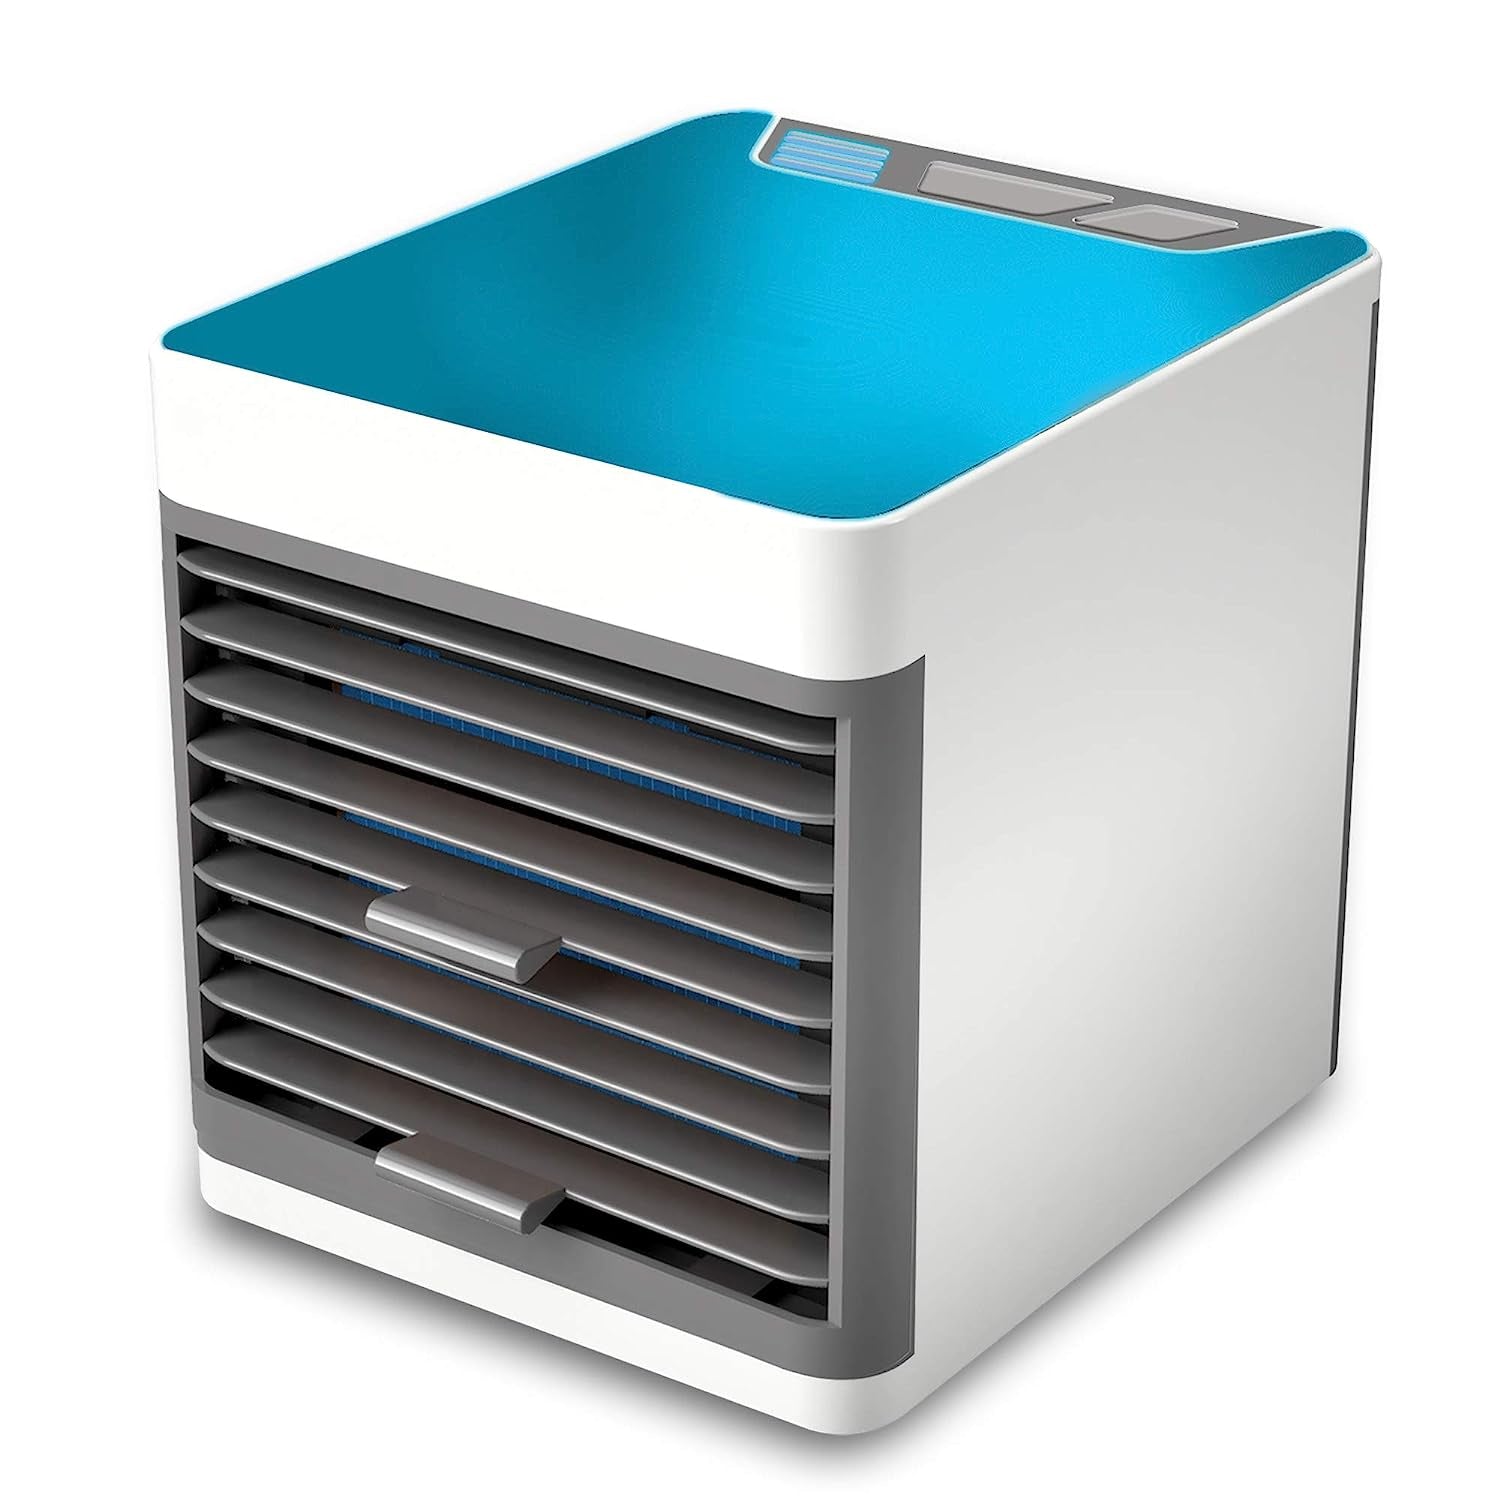 1464 Mini Portable Air Cooler, Personal Space Cooler Easy to fill water and mood led light and portable Air Conditioner Device Cool Any Space like Home Office DeoDap